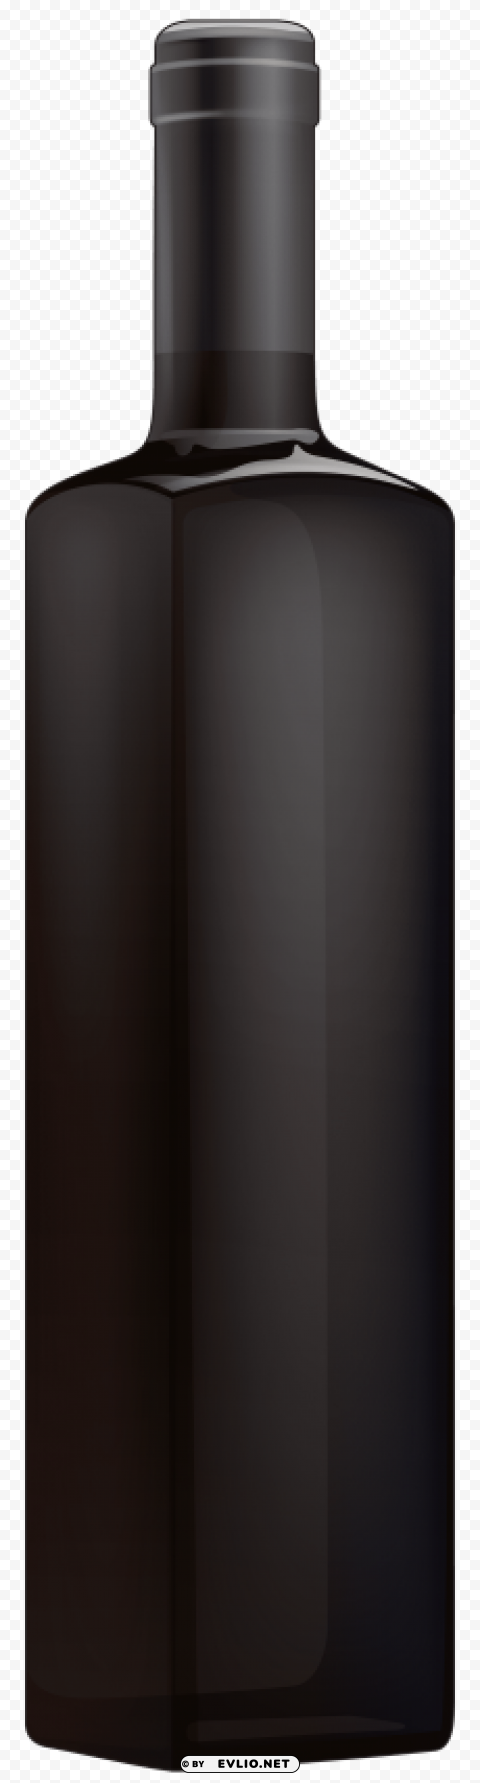 Black Bottle PNG Images With No Background Needed